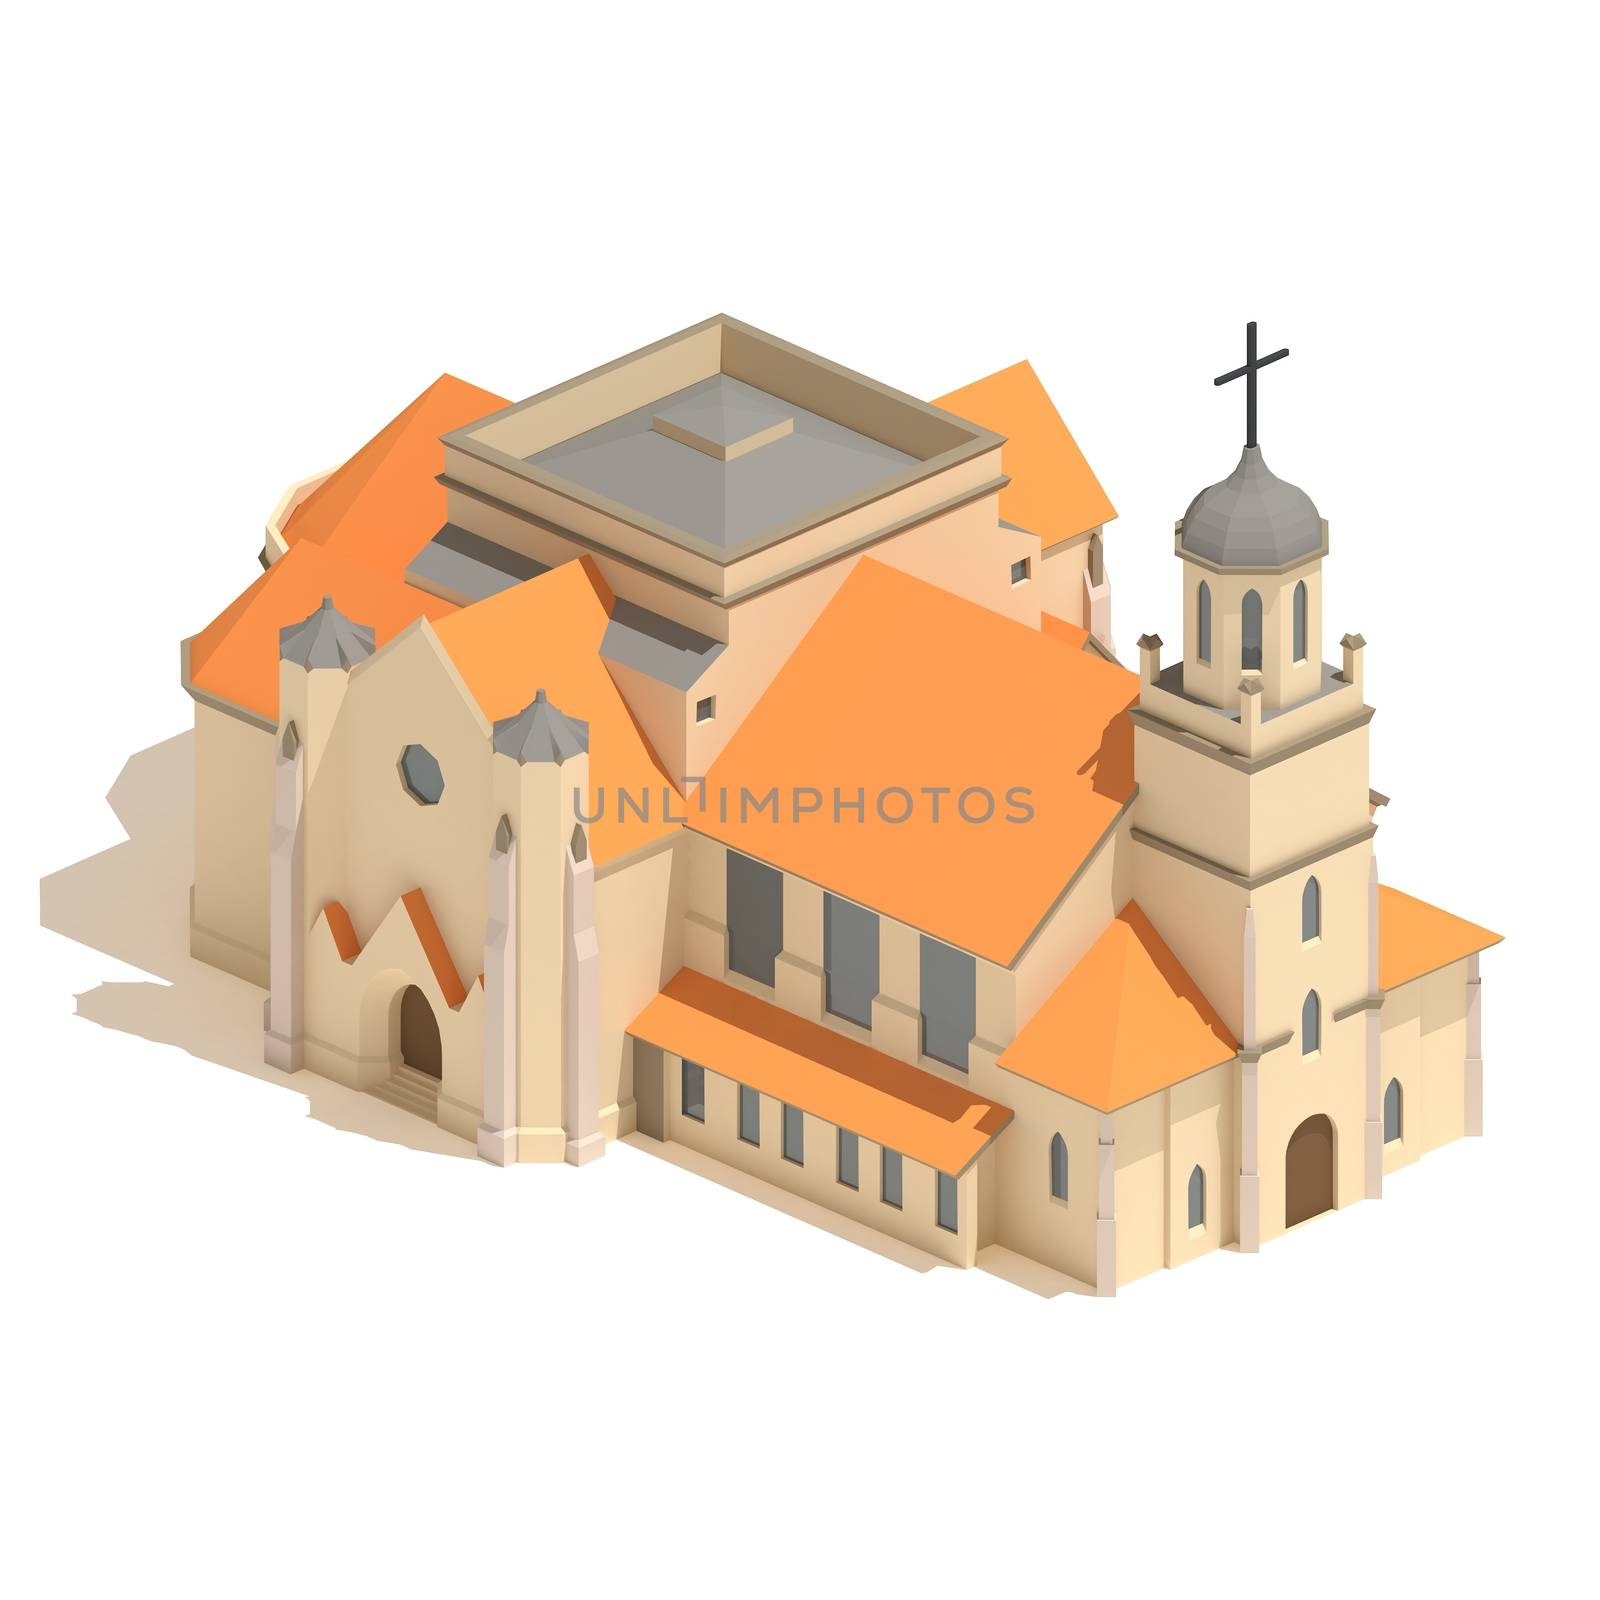 Flat 3d model isometric Christian church icon or cathedral building illustration isolated on white background by ingalinder